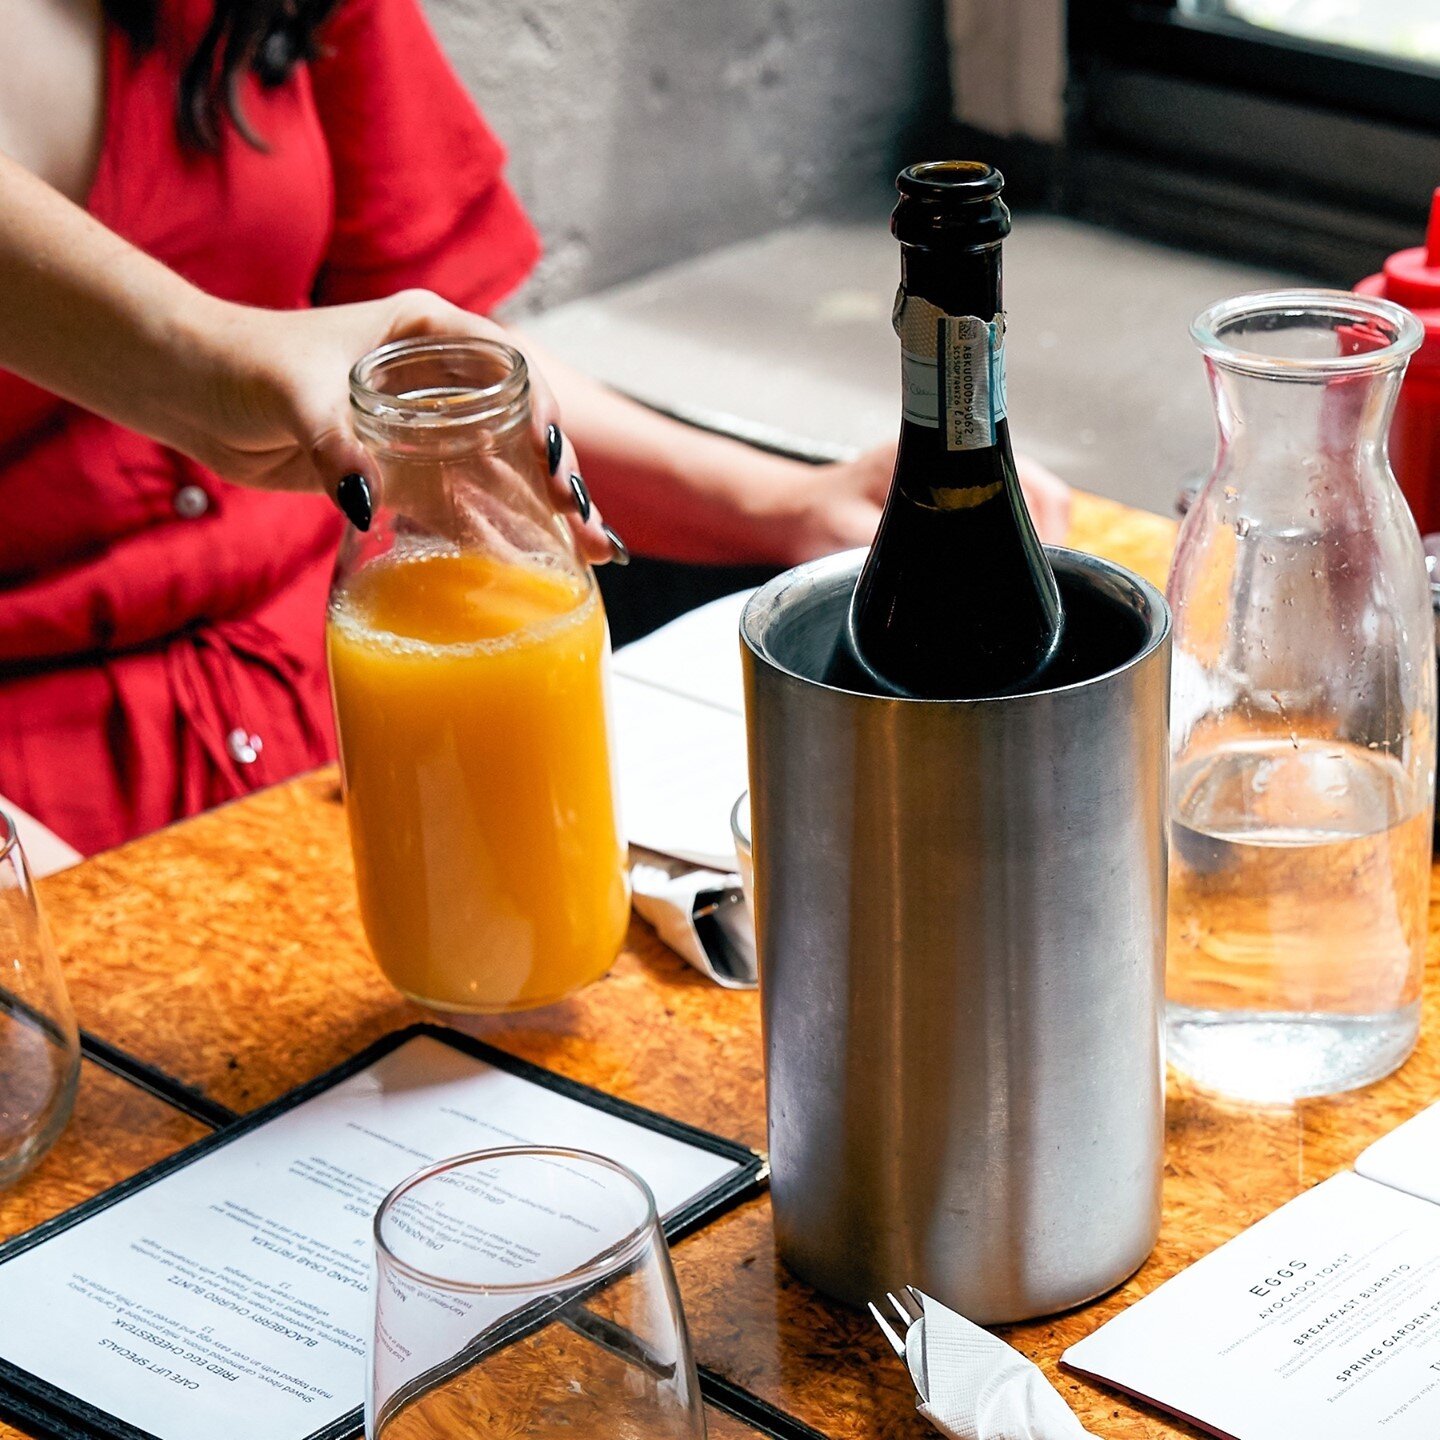 Friday calls for a celebration. Snag your favorite bottle of bubbles and come over for some BYOB mimosas.